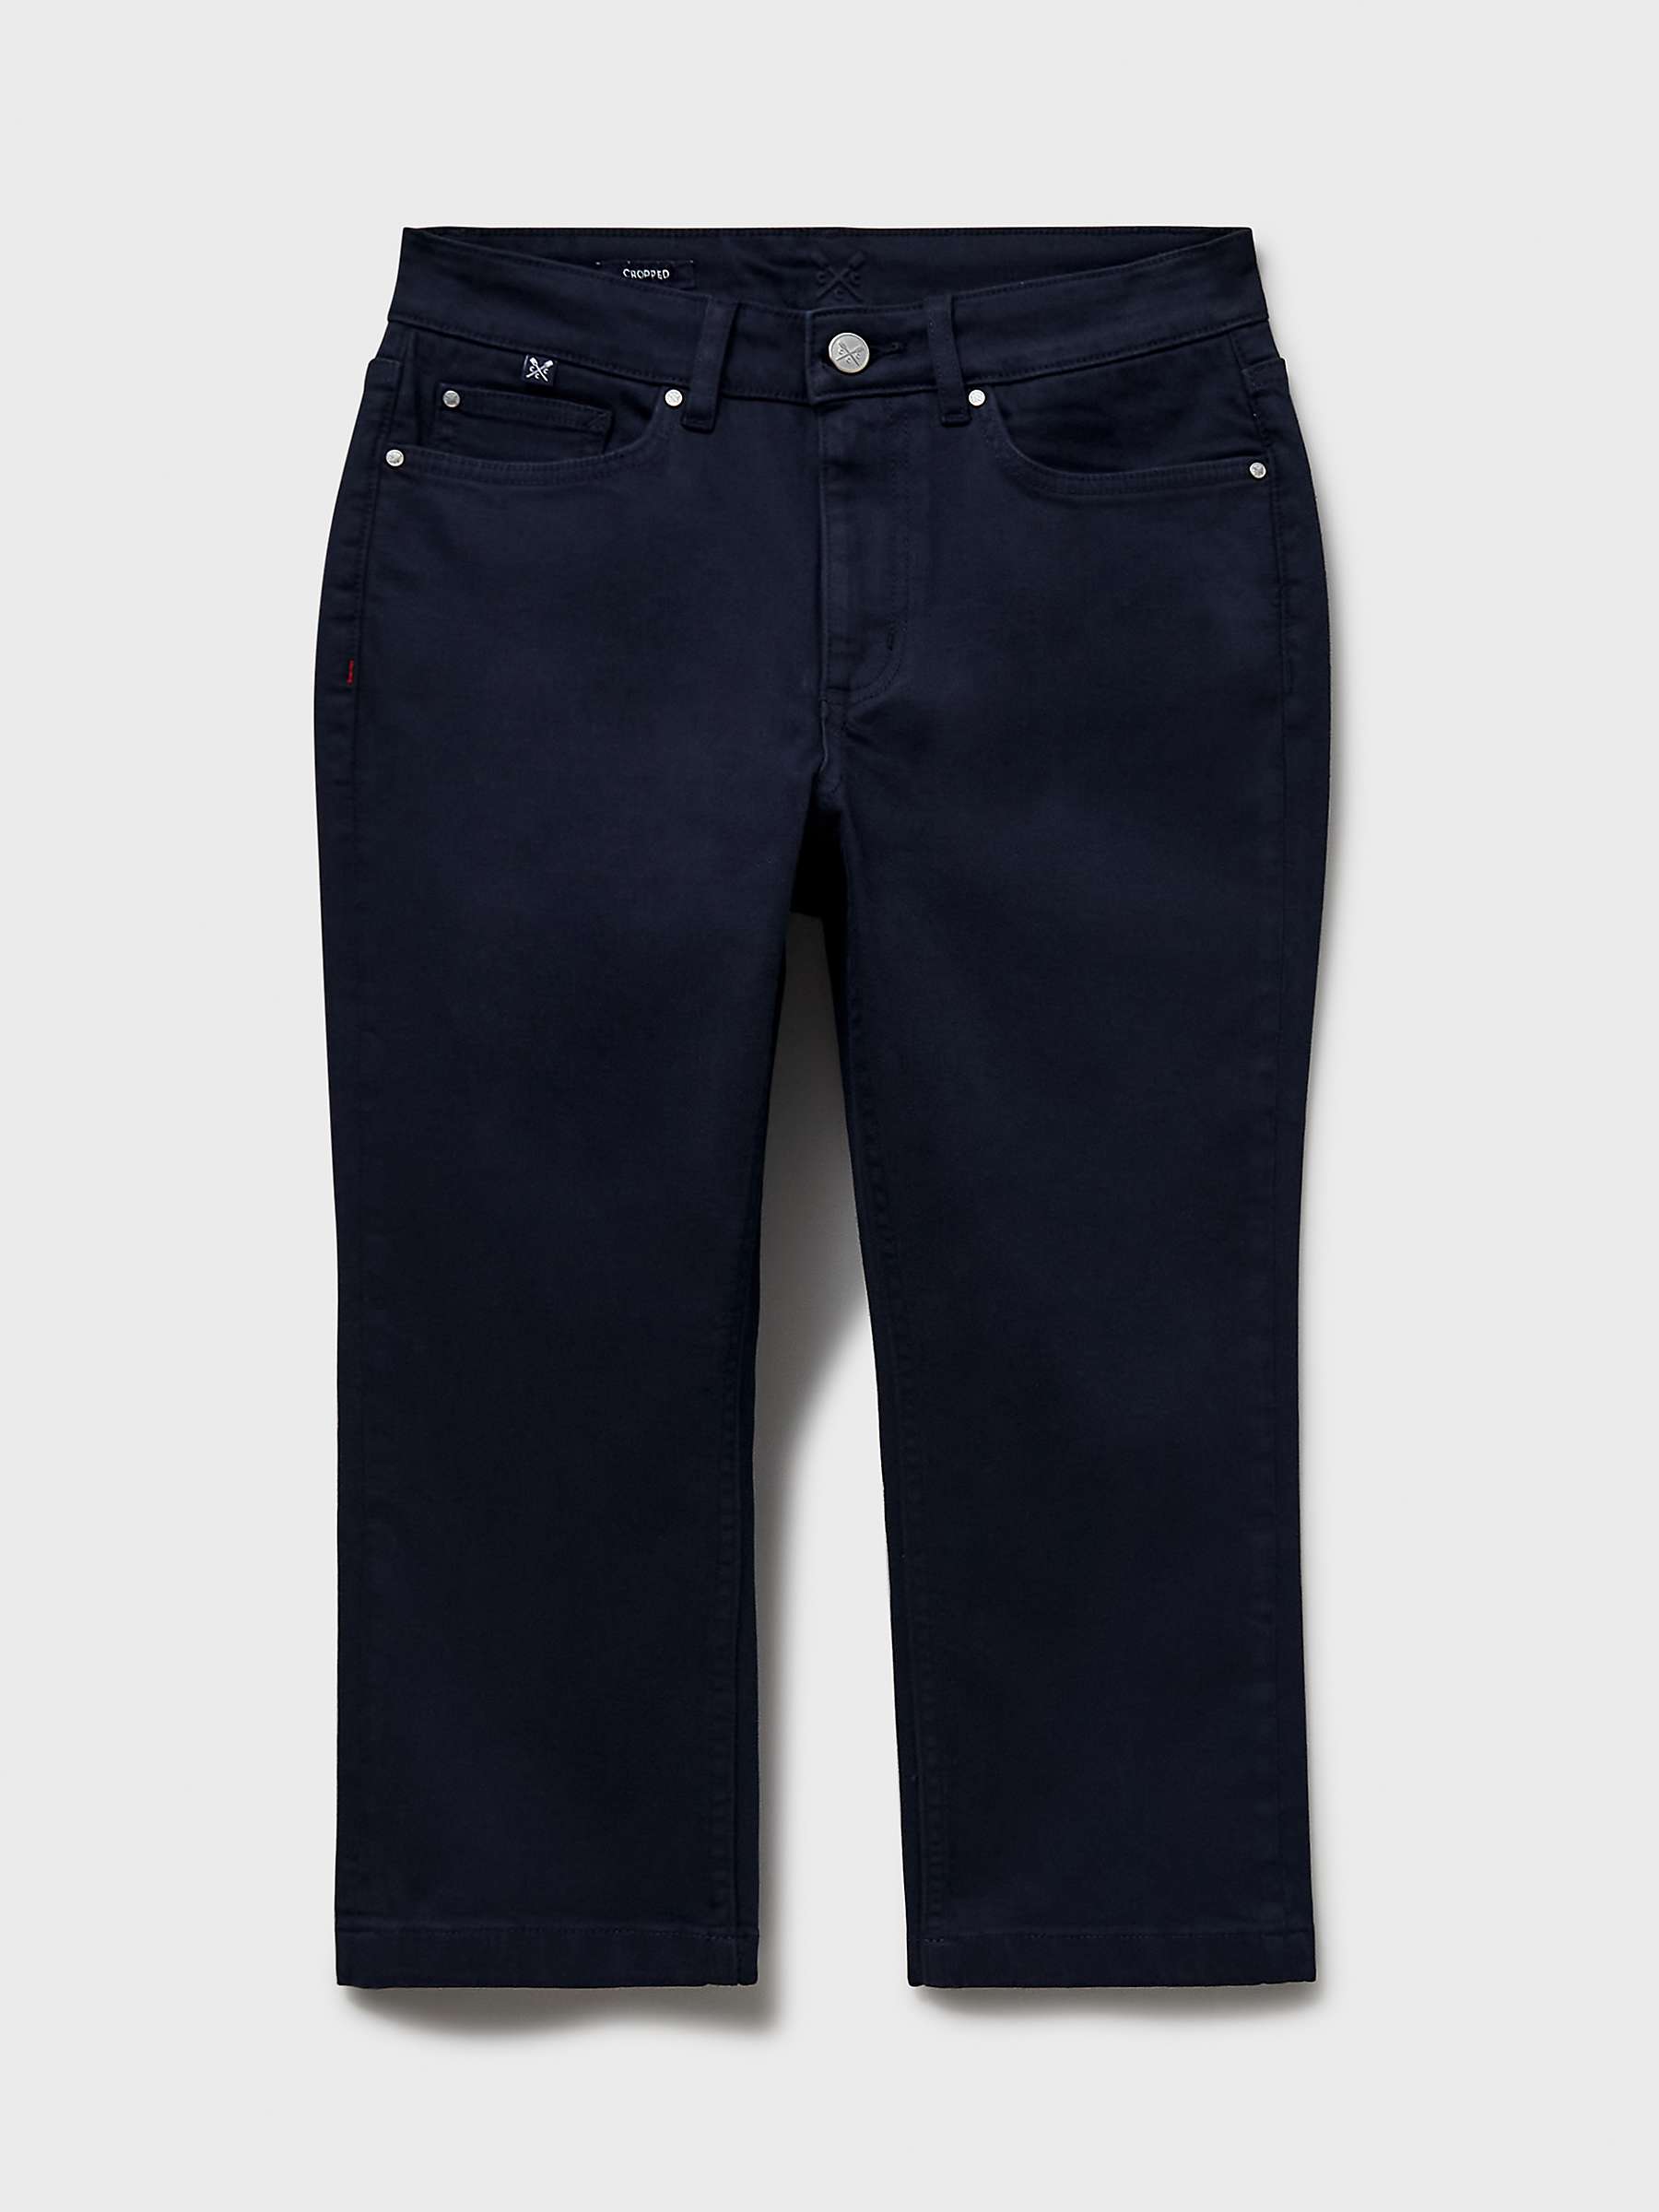 Buy Crew Clothing Mia Cropped Trousers Online at johnlewis.com